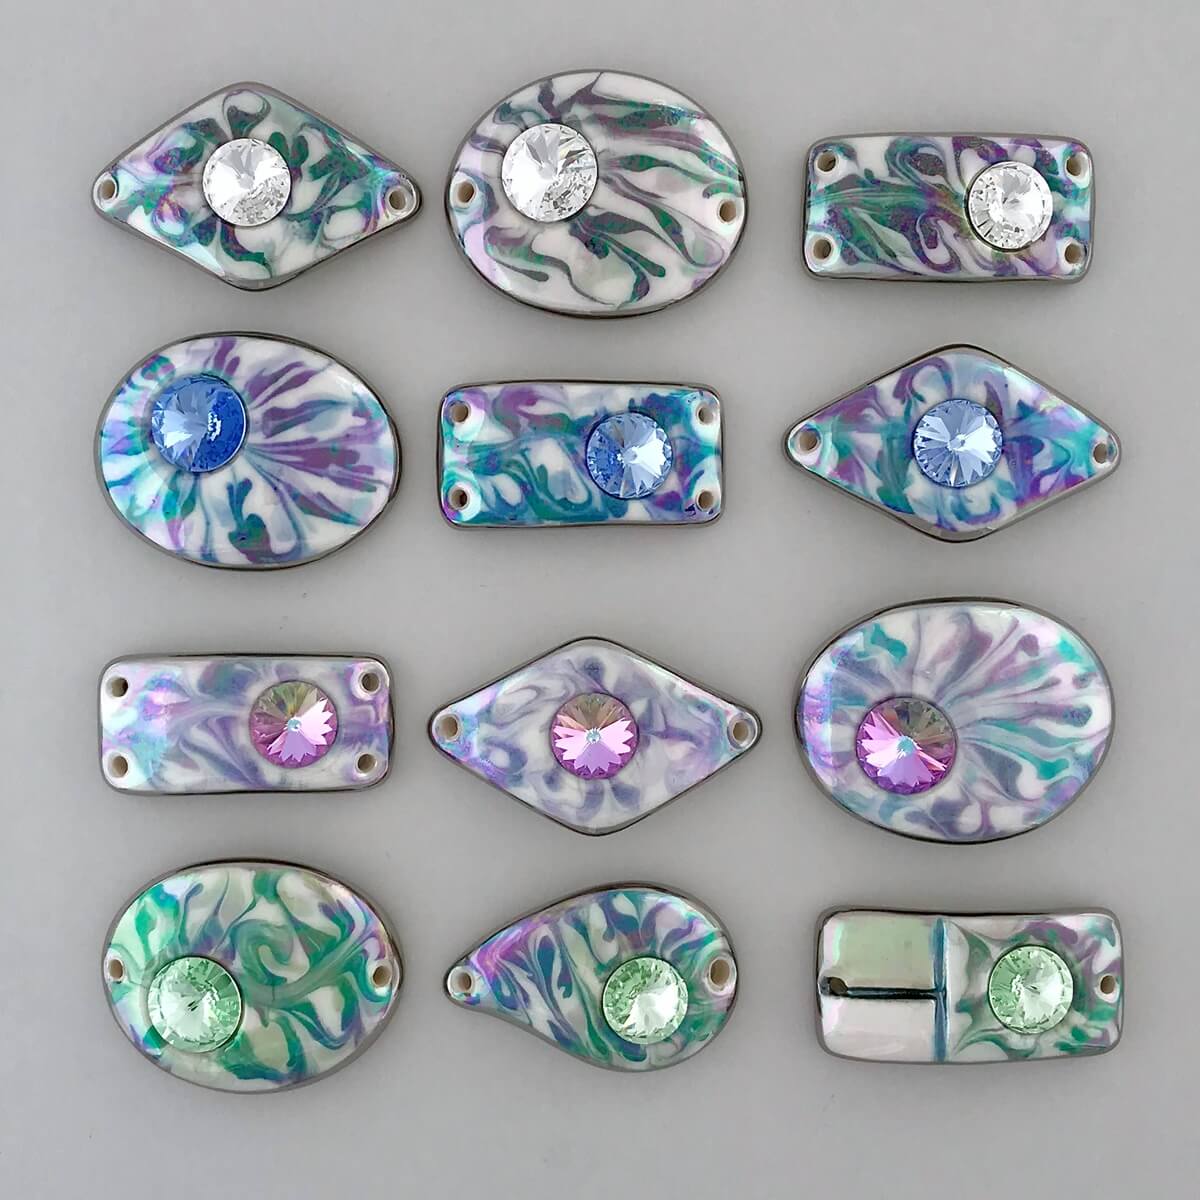 Marbled bracelet bars with attachment holes or styled to glue onto a cuff pad.